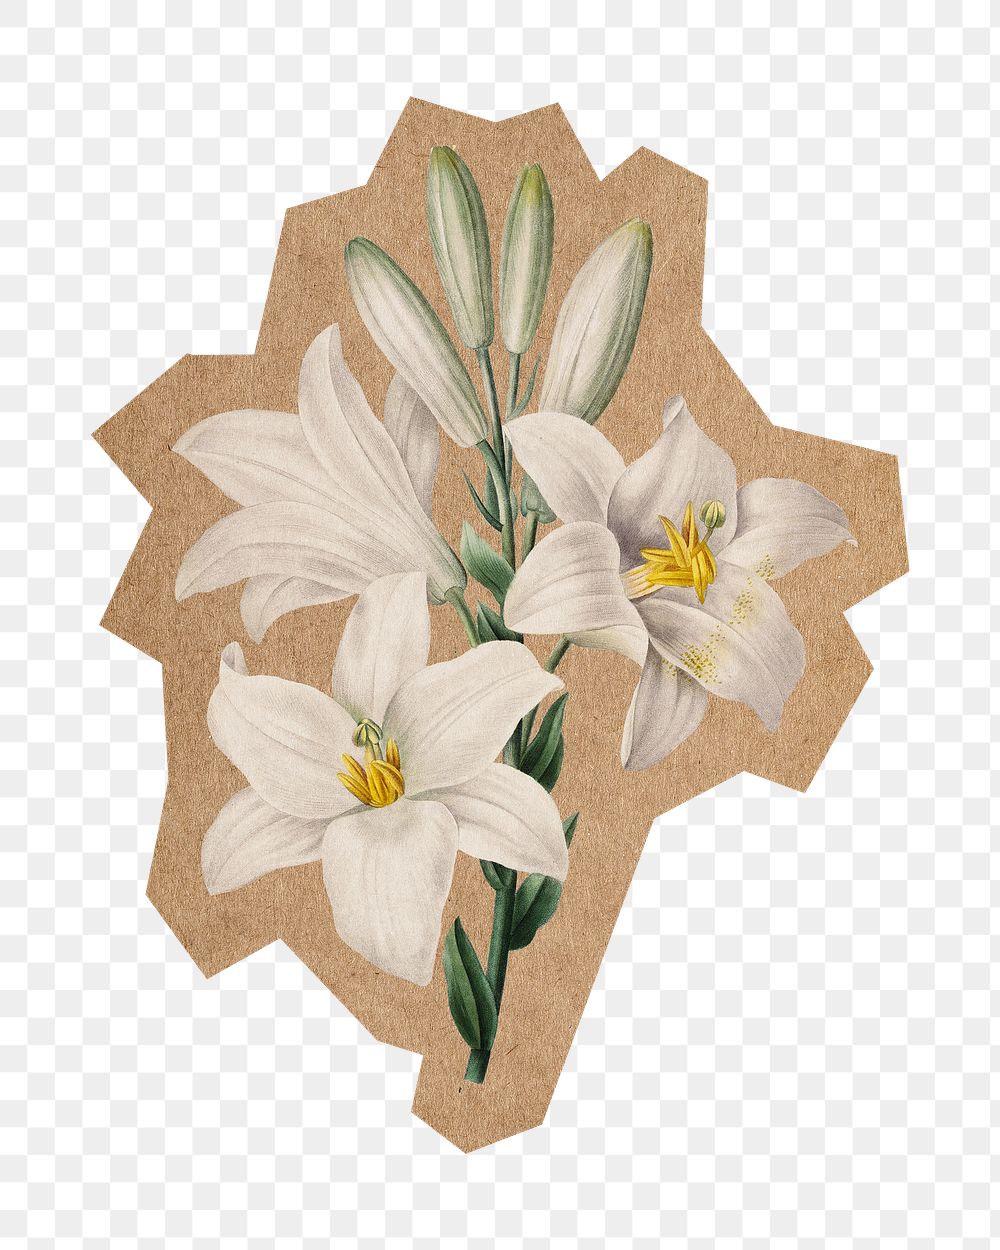 Png Madonna Lily png, cut out paper element, transparent background. Artwork from Pierre Joseph Redouté remixed by rawpixel.